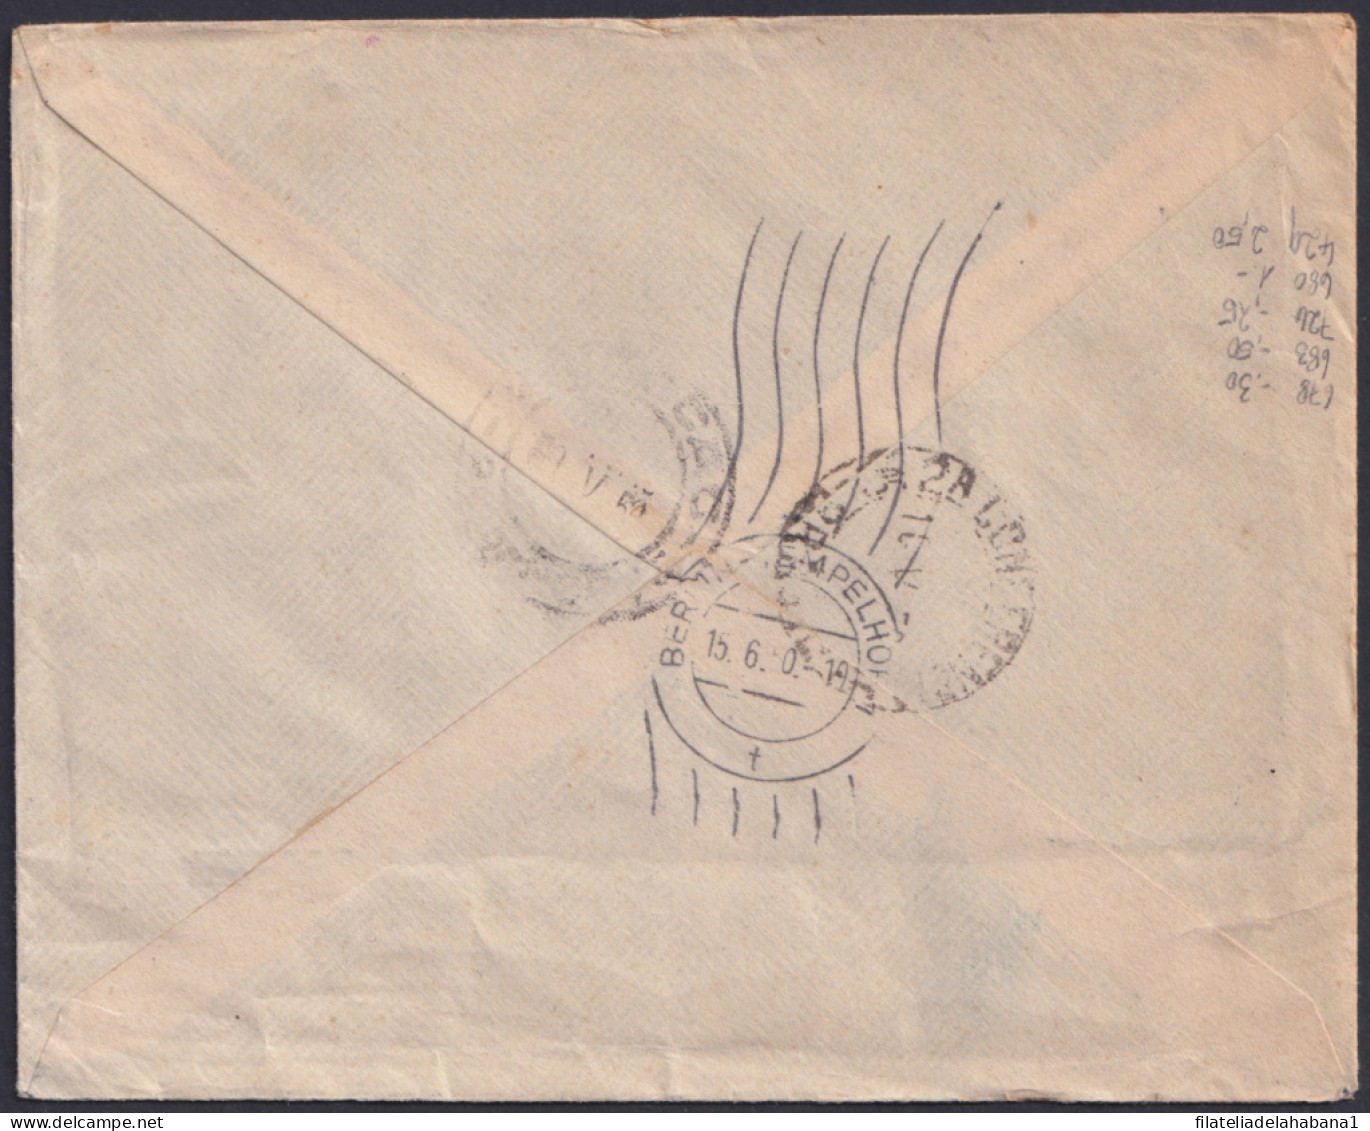 F-EX48639 BRAZIL BRASIL 1956 REGISTERED AIR MAIL RIO BLANCO COVER TO GERMANY.  - Covers & Documents